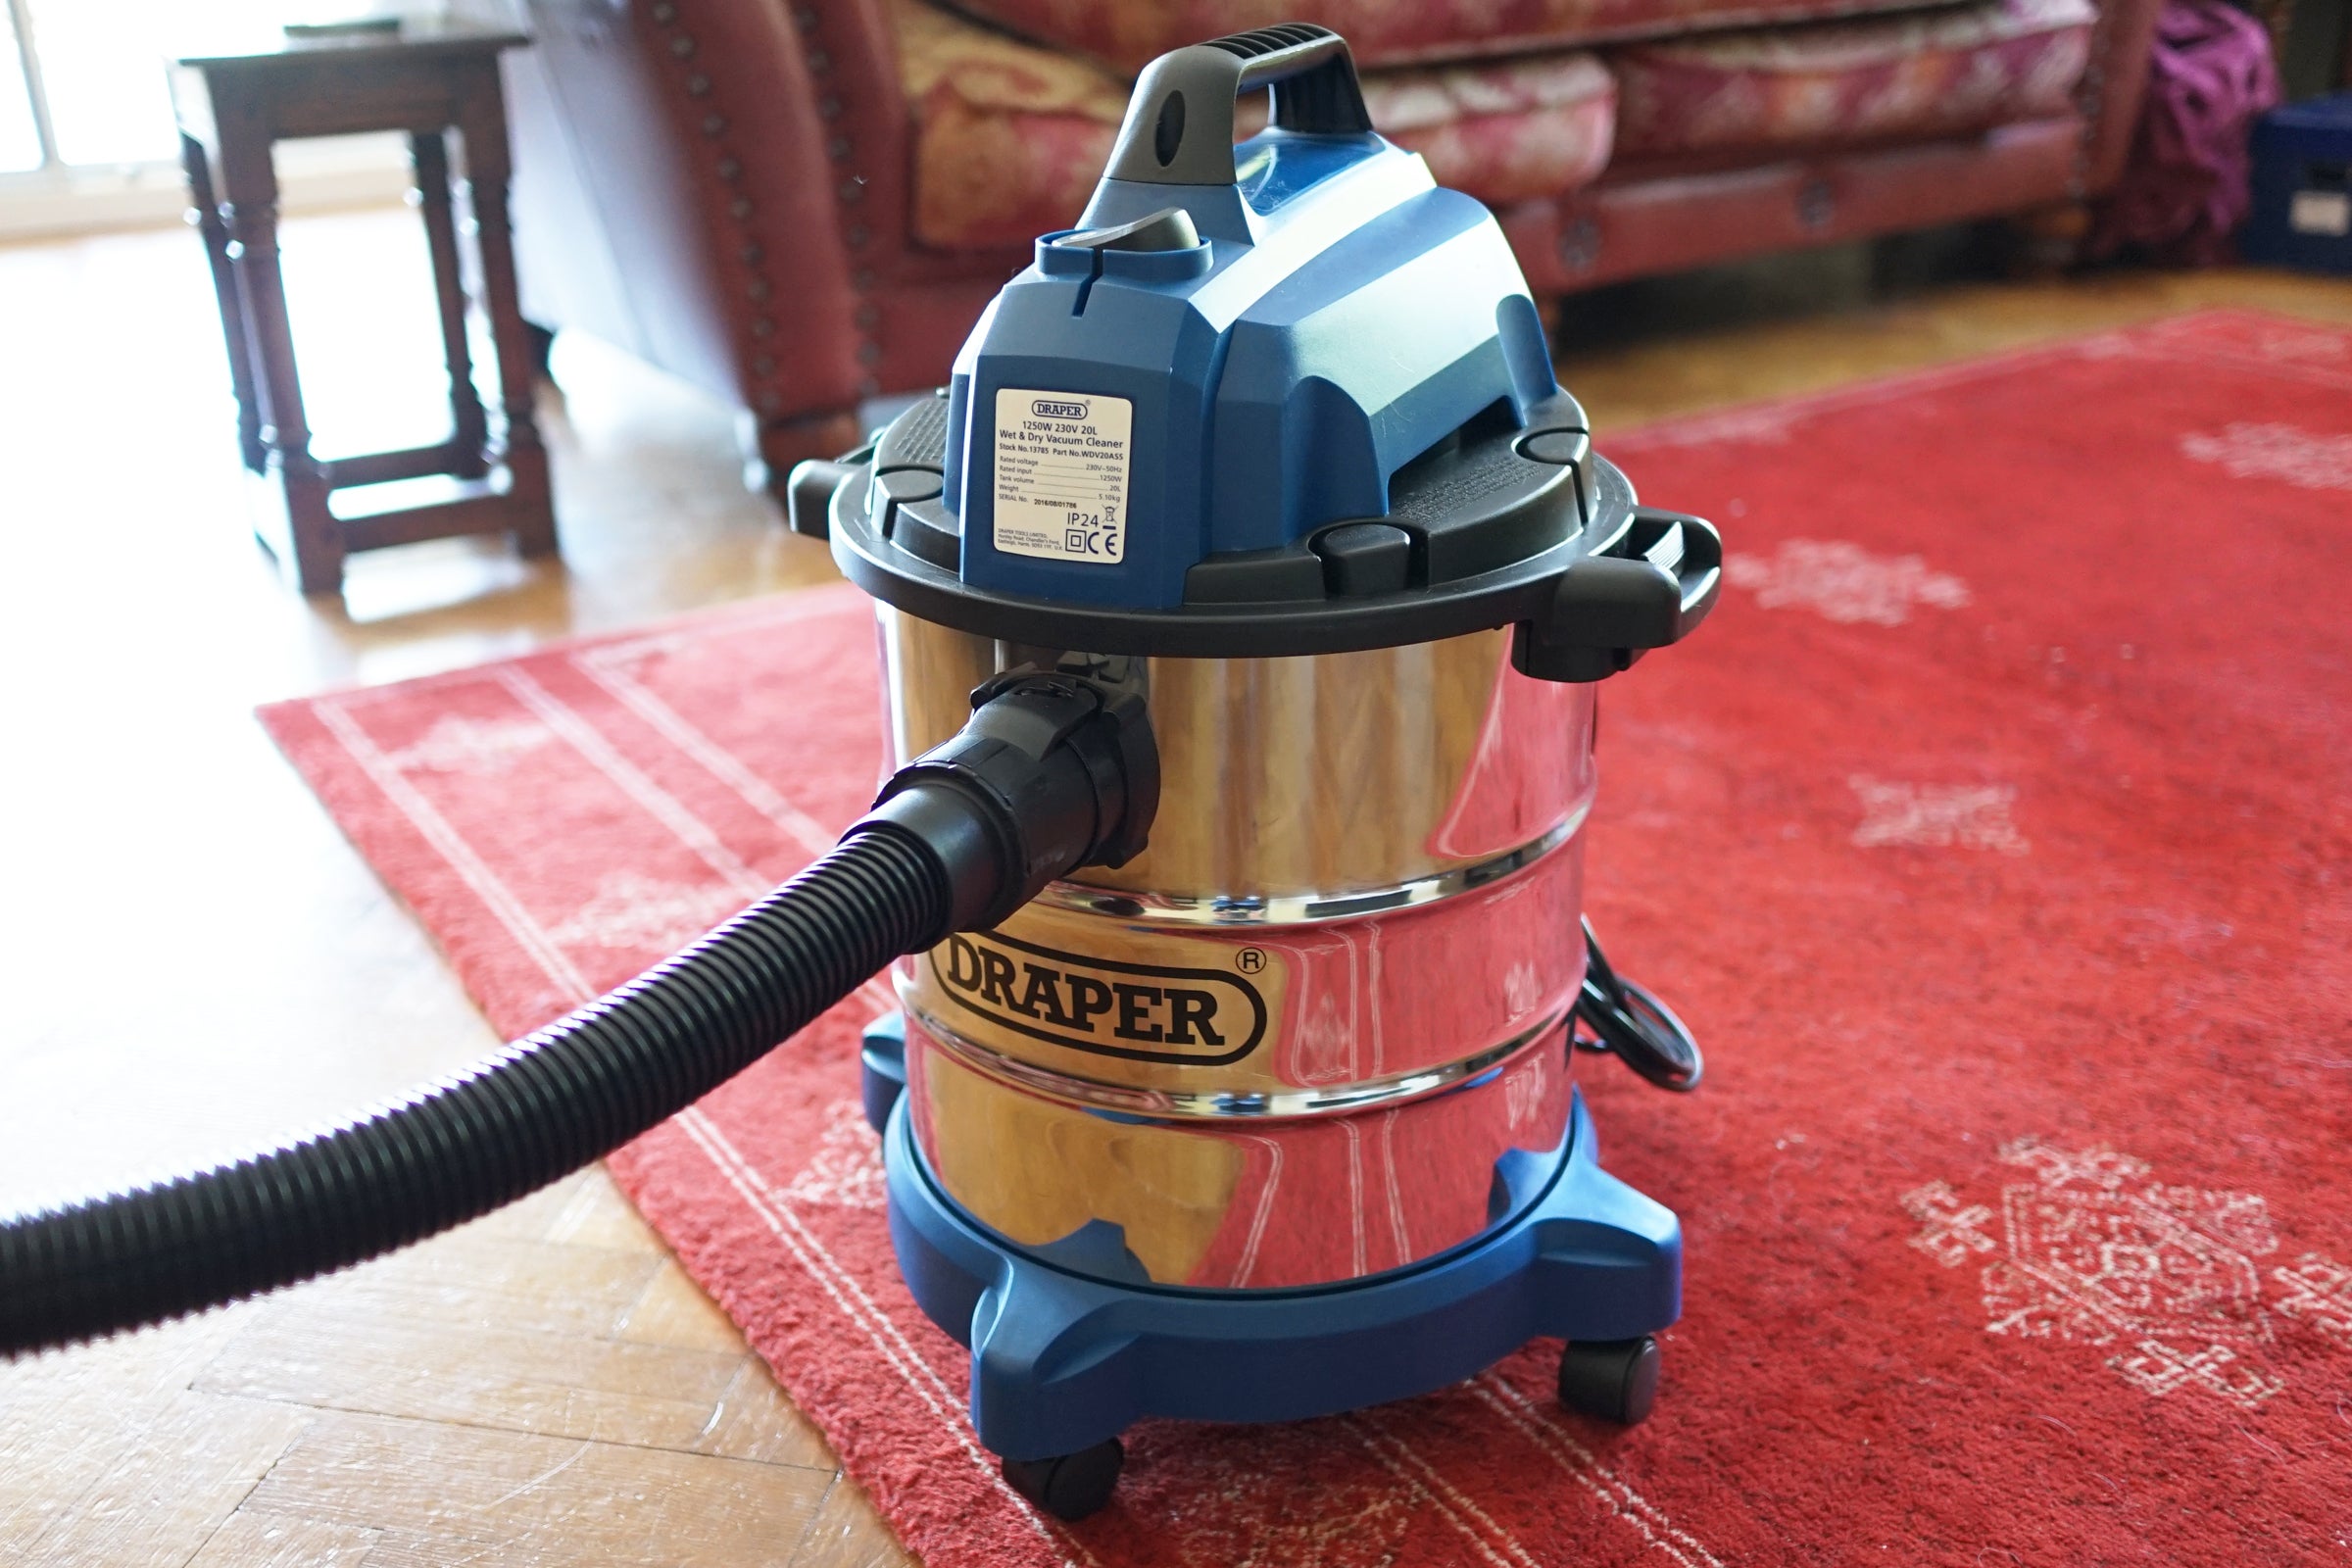 Available And so on graduate Draper 13785 Wet & Dry Vacuum Cleaner Review | Trusted Reviews